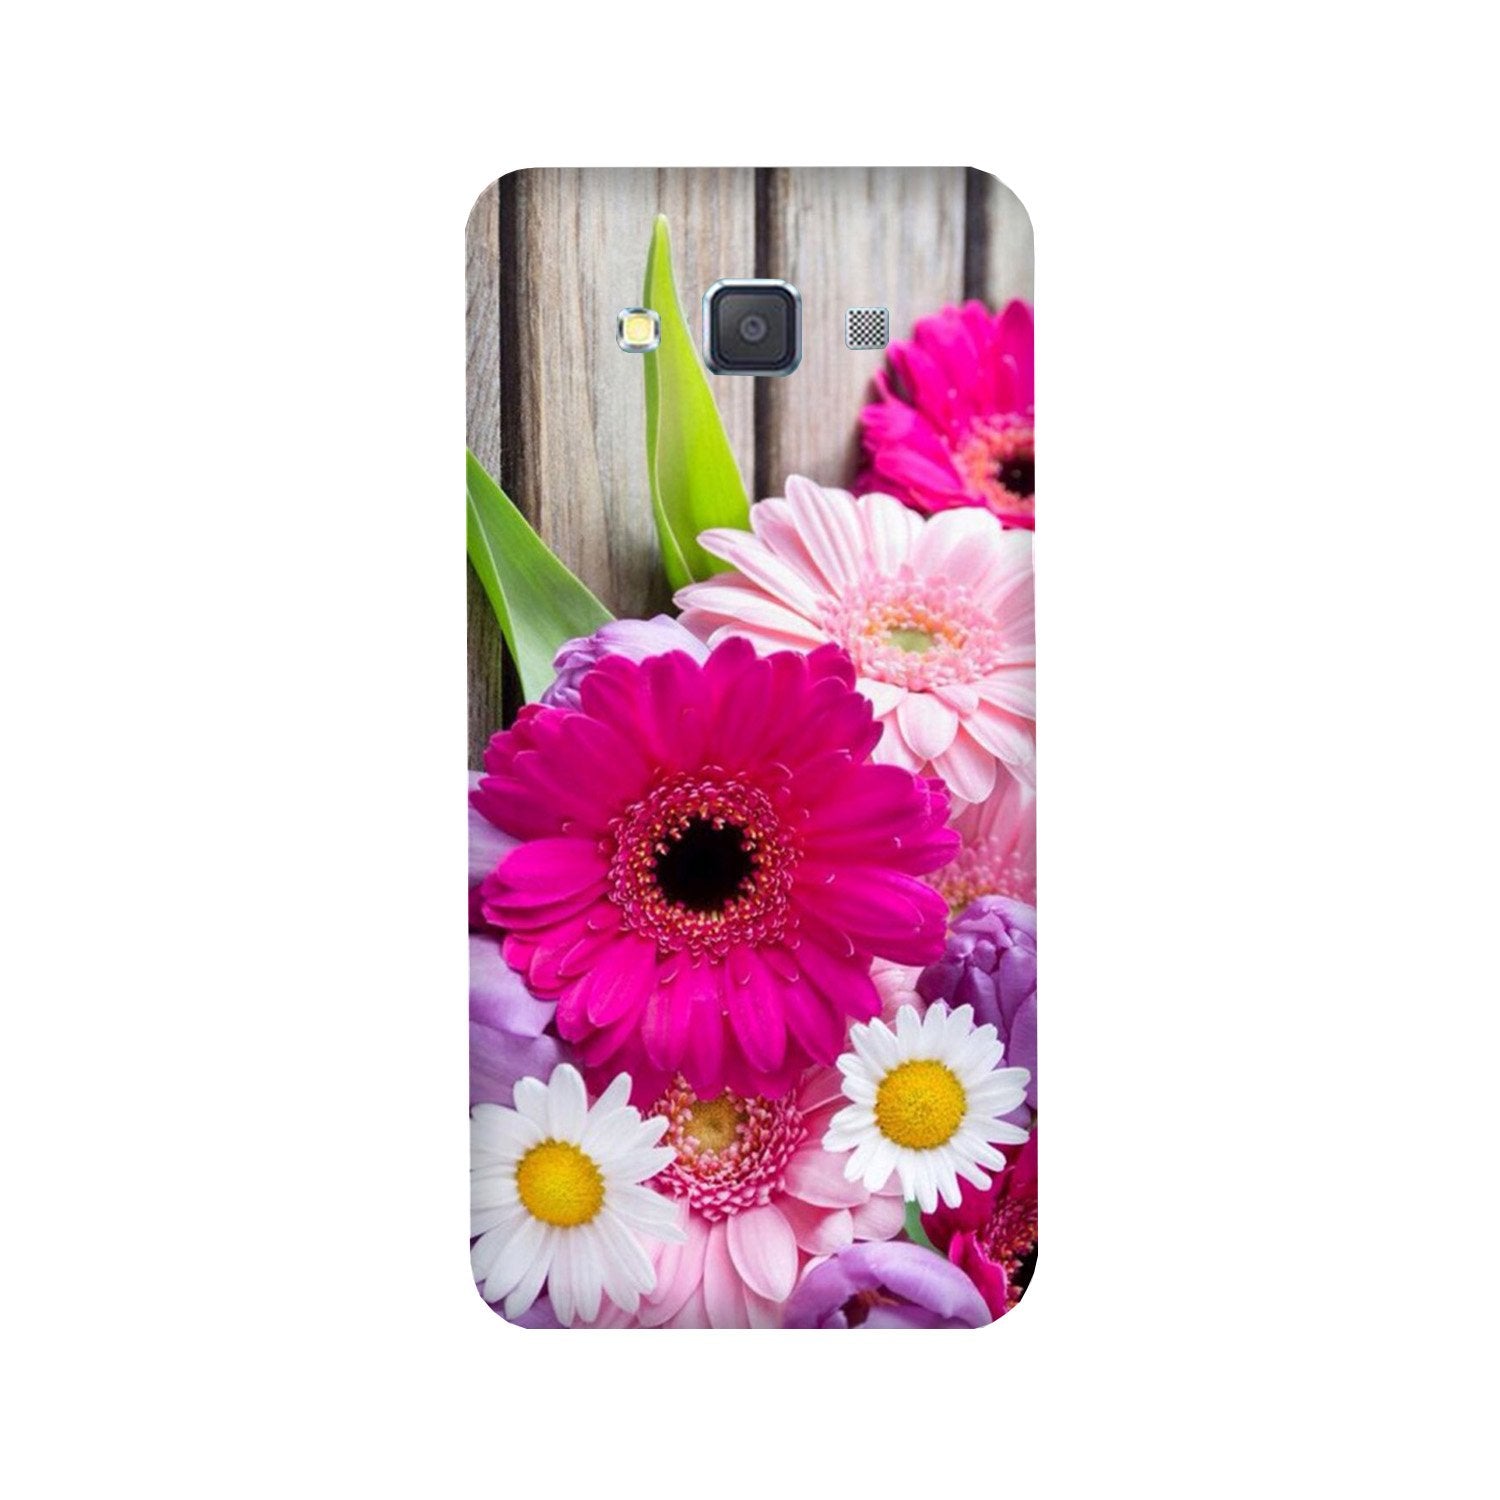 Coloful Daisy2 Case for Galaxy ON7/ON7 Pro